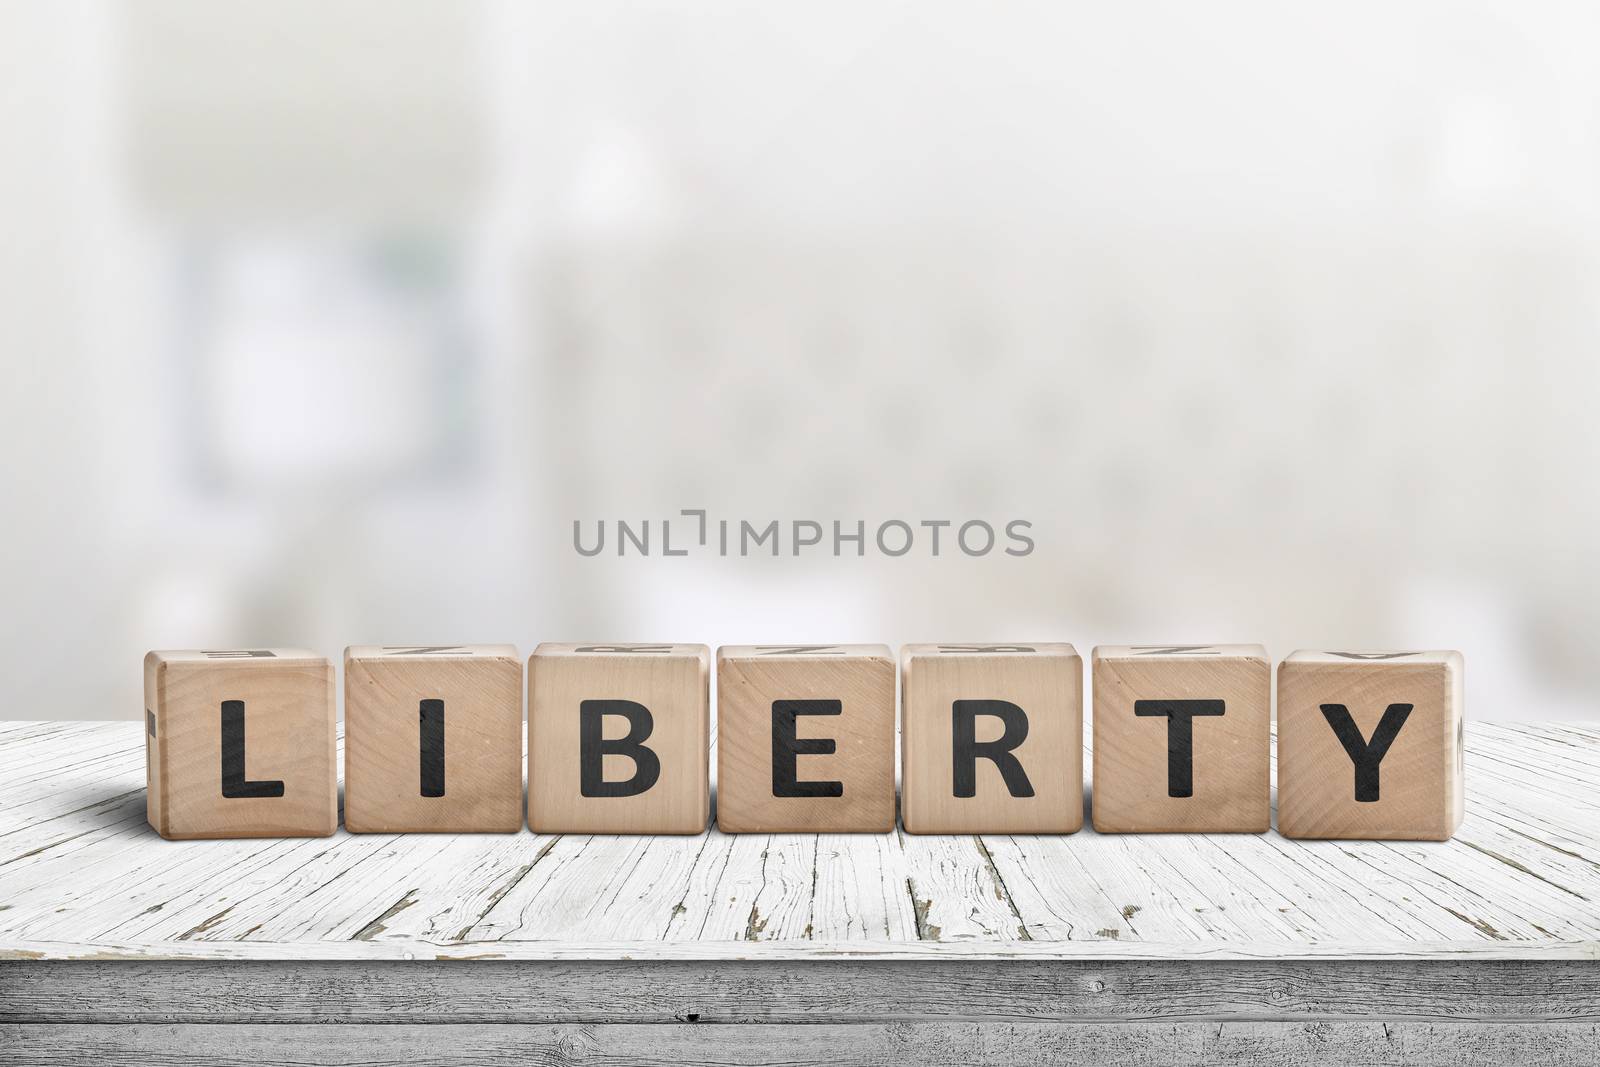 Liberty sign made of wood on a desk in an indoor environment